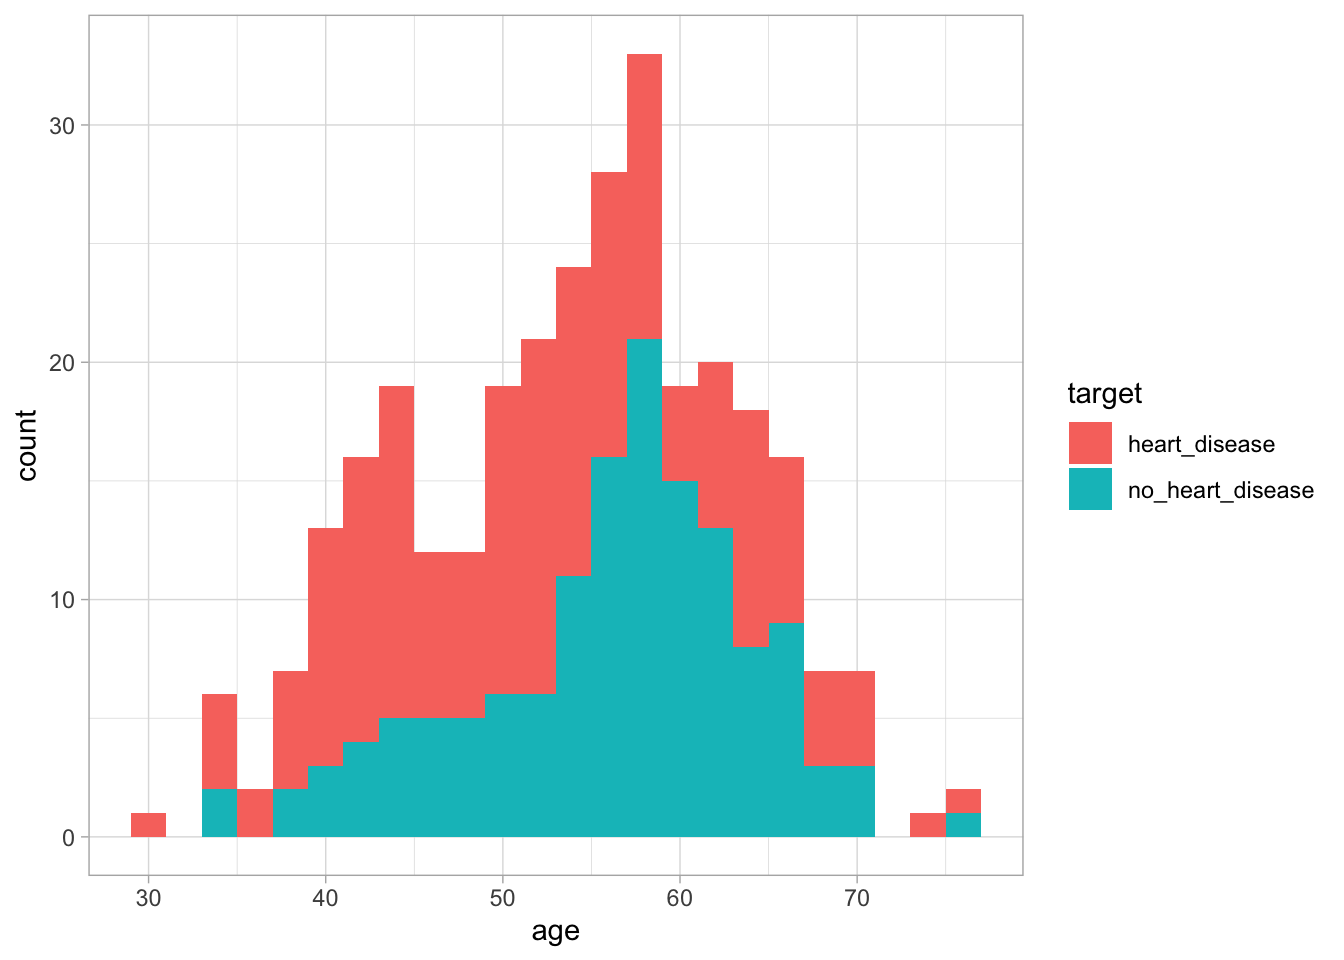 The distribution of age based on whether an individual has heart disease